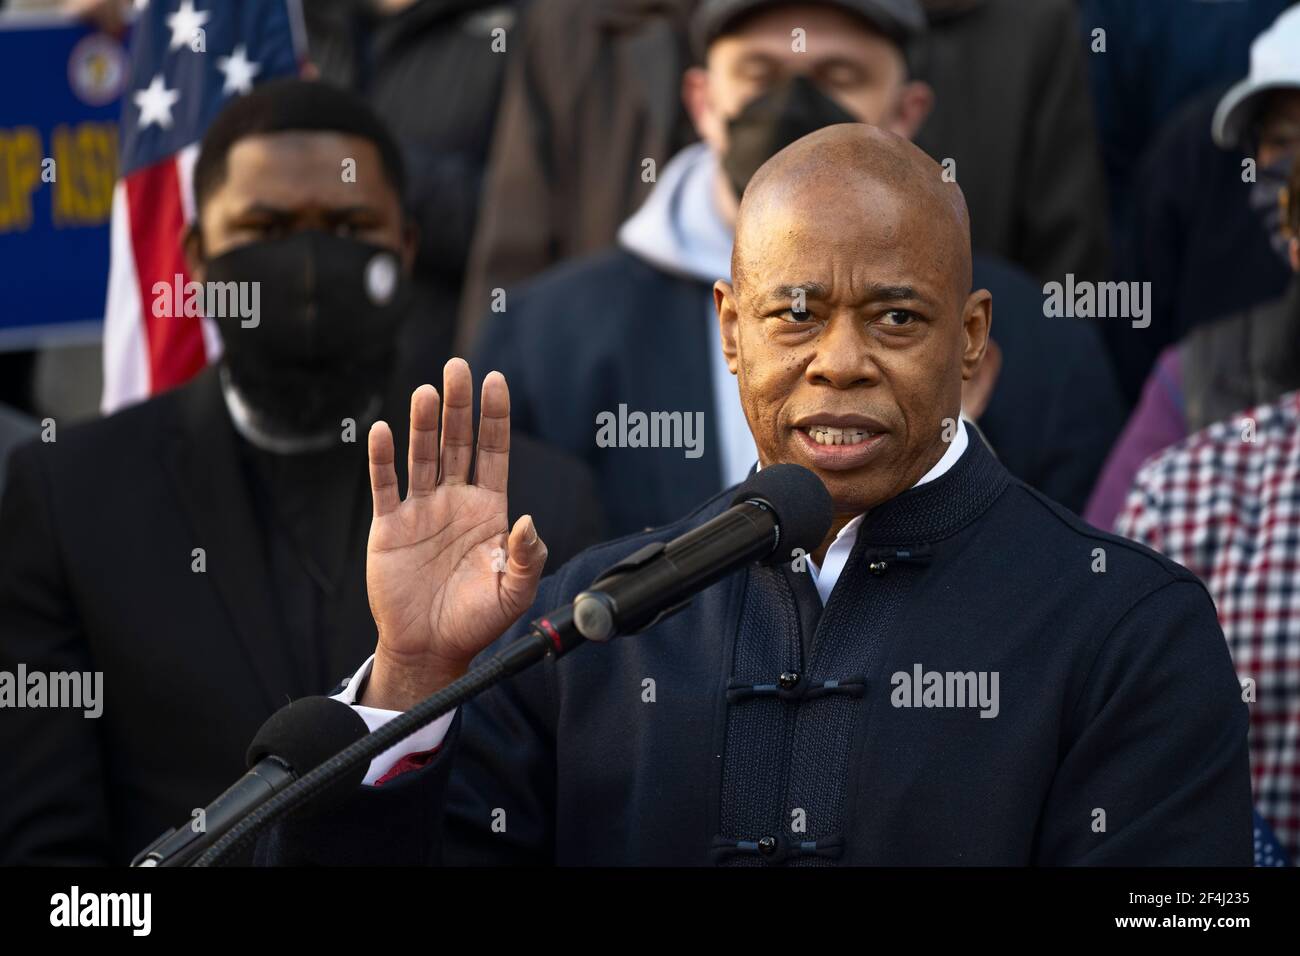 Brooklyn, New York, USA. 21 March 2021 Brooklyn Borough President Eric Adams leads a rally against violence and discrimination after recent attacks against Asian-Americans in New York City and across the U.S. during COVID-19 pandemic.  Adams is running for mayor of New York City this year. Credit: Joseph Reid/Alamy Live News Stock Photo